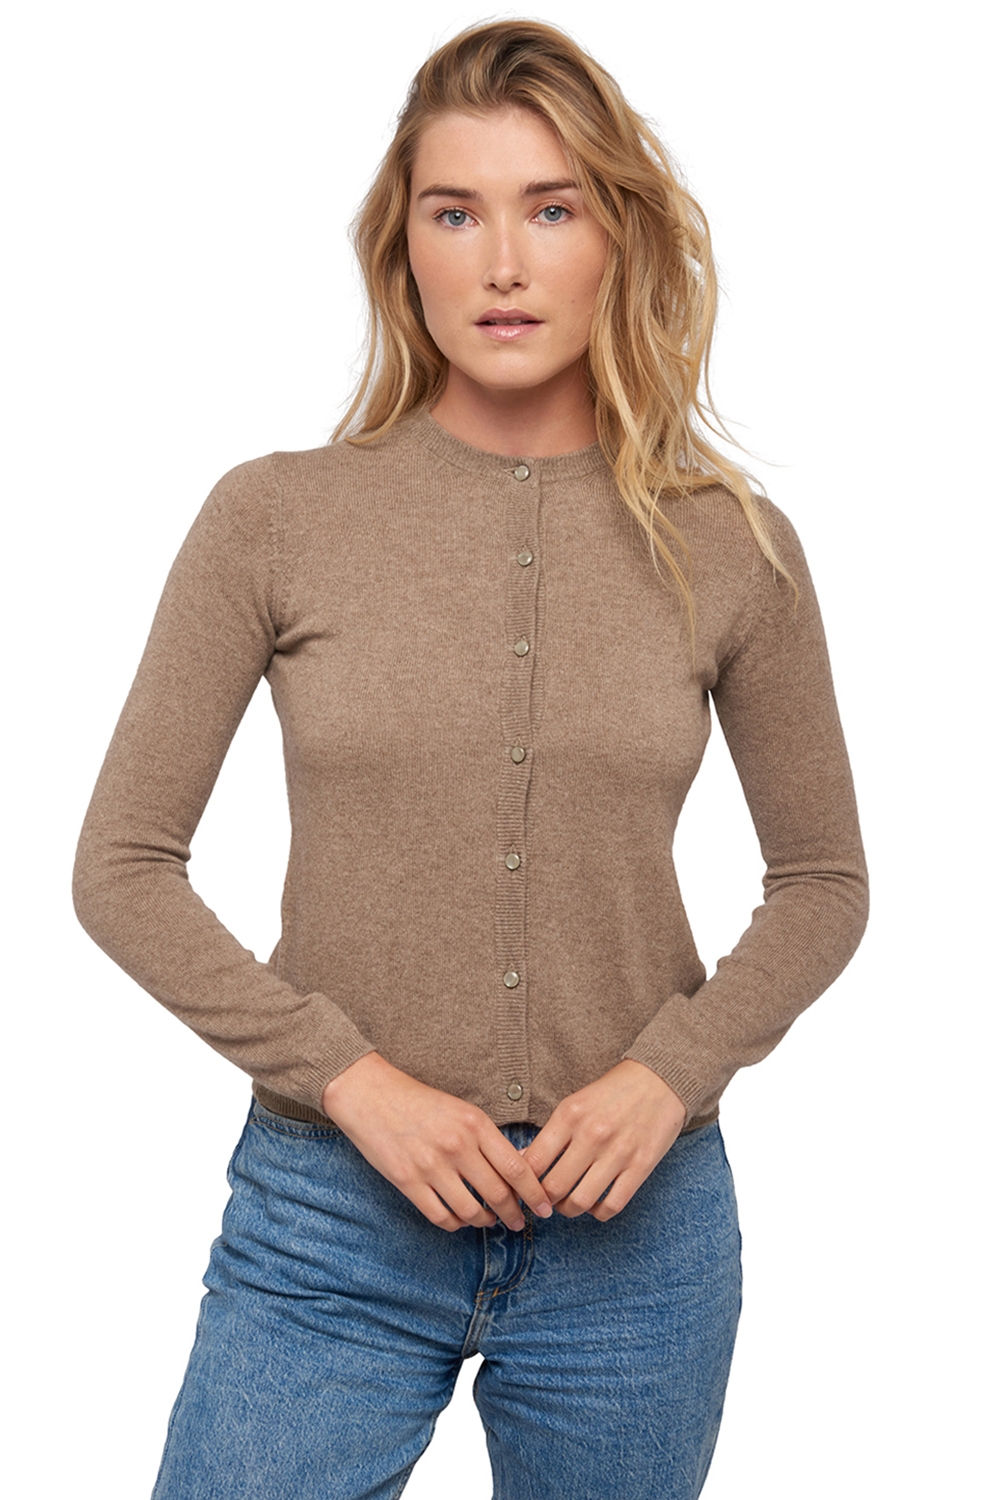 Cachemire pull femme collection printemps ete chloe natural brown m